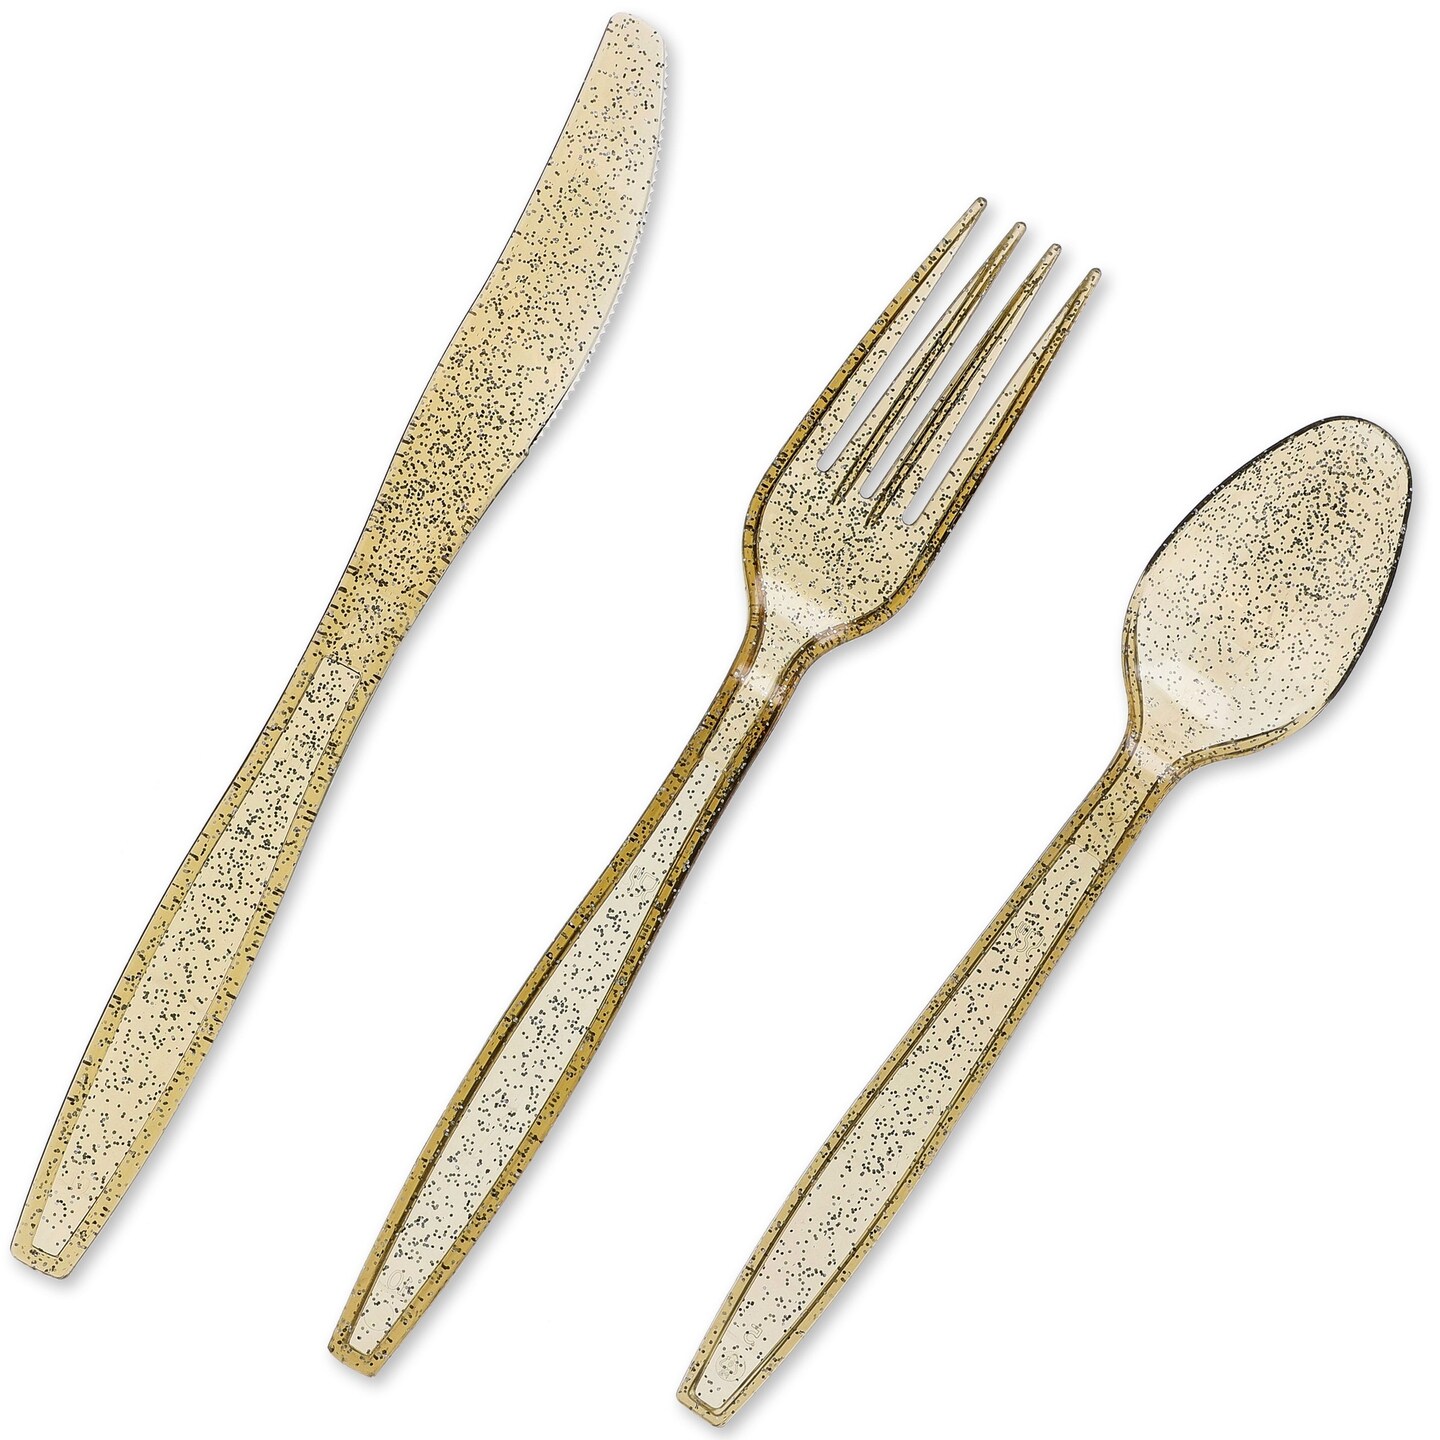 Gold Glitter Plastic Silverware for Weddings, Birthday Party Cutlery, Forks, Spoons, Knives, 96 Pcs